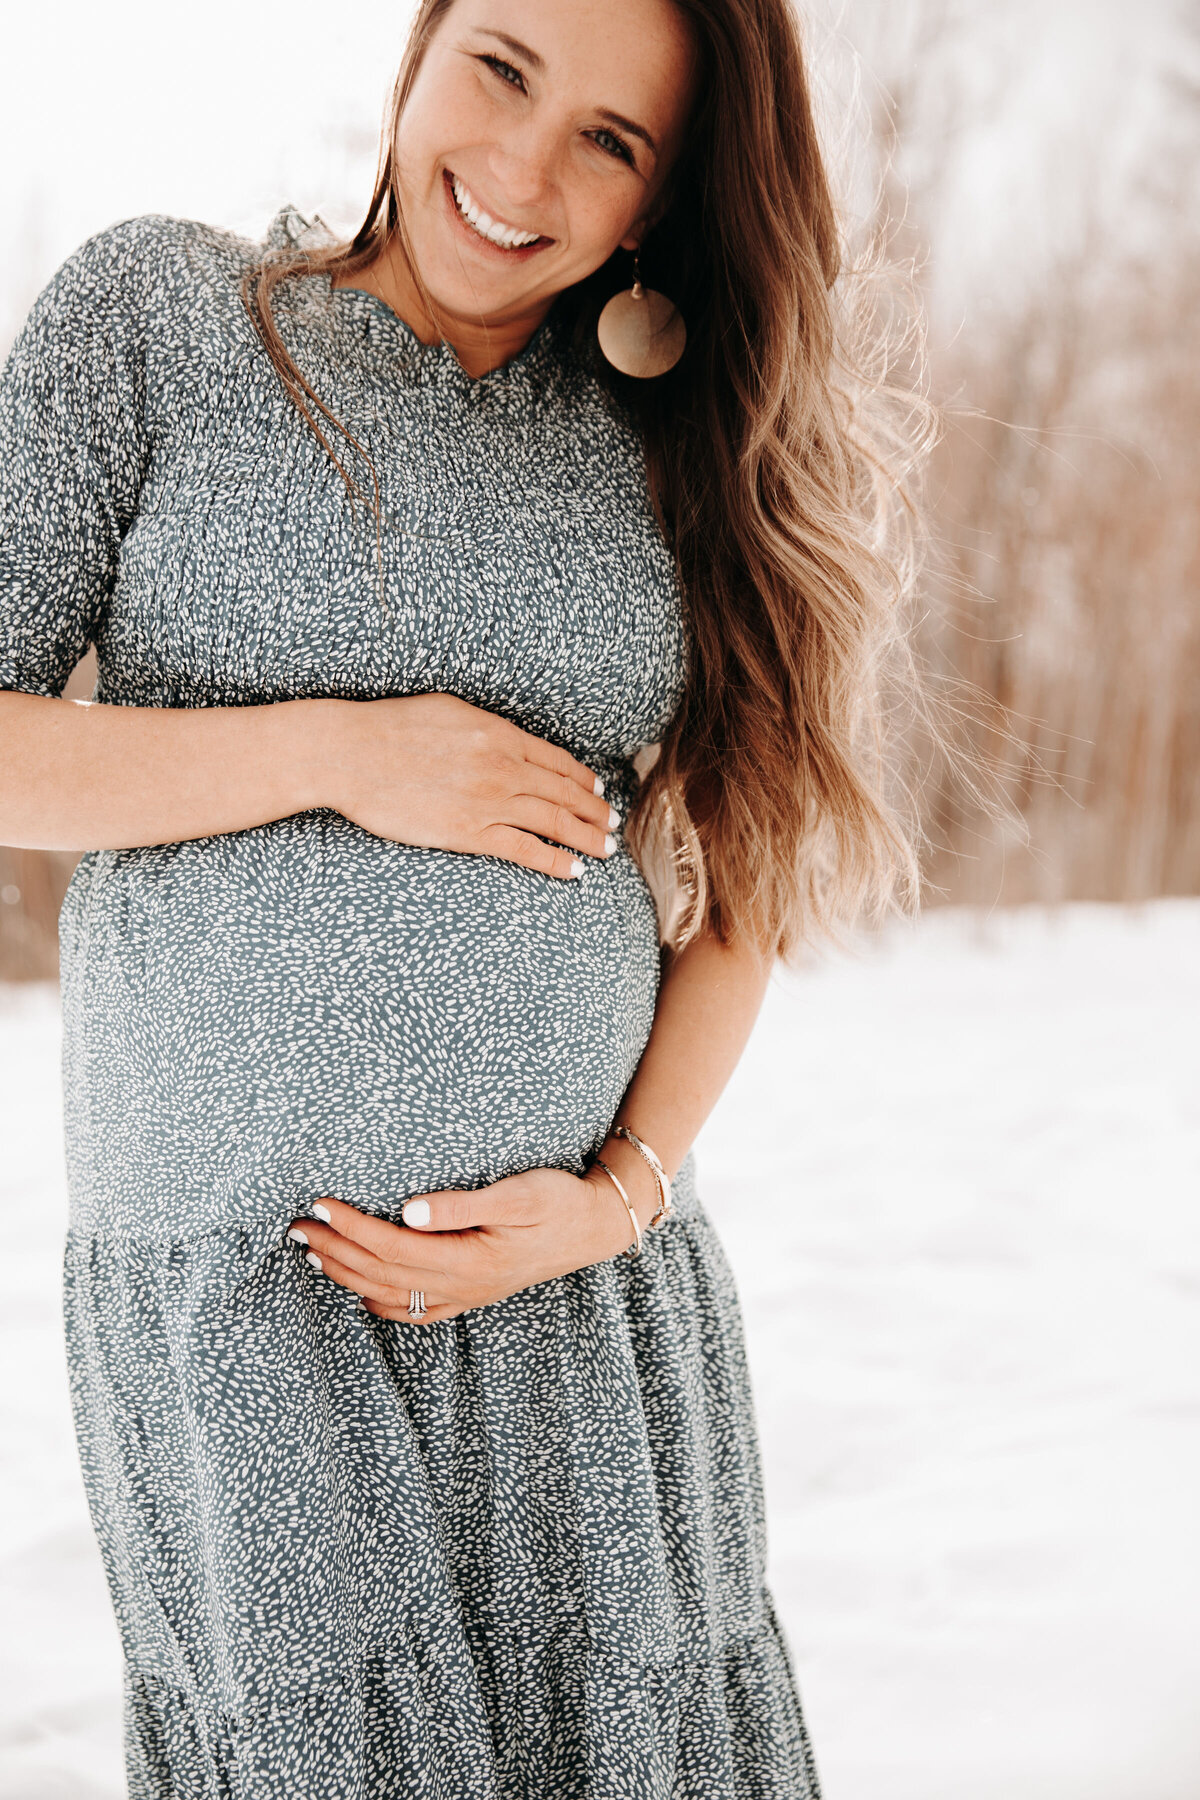 Idaho Falls maternity photographer captures pregnant woman in a blue and white dress holding her baby bump as she smiles in a snowy flied